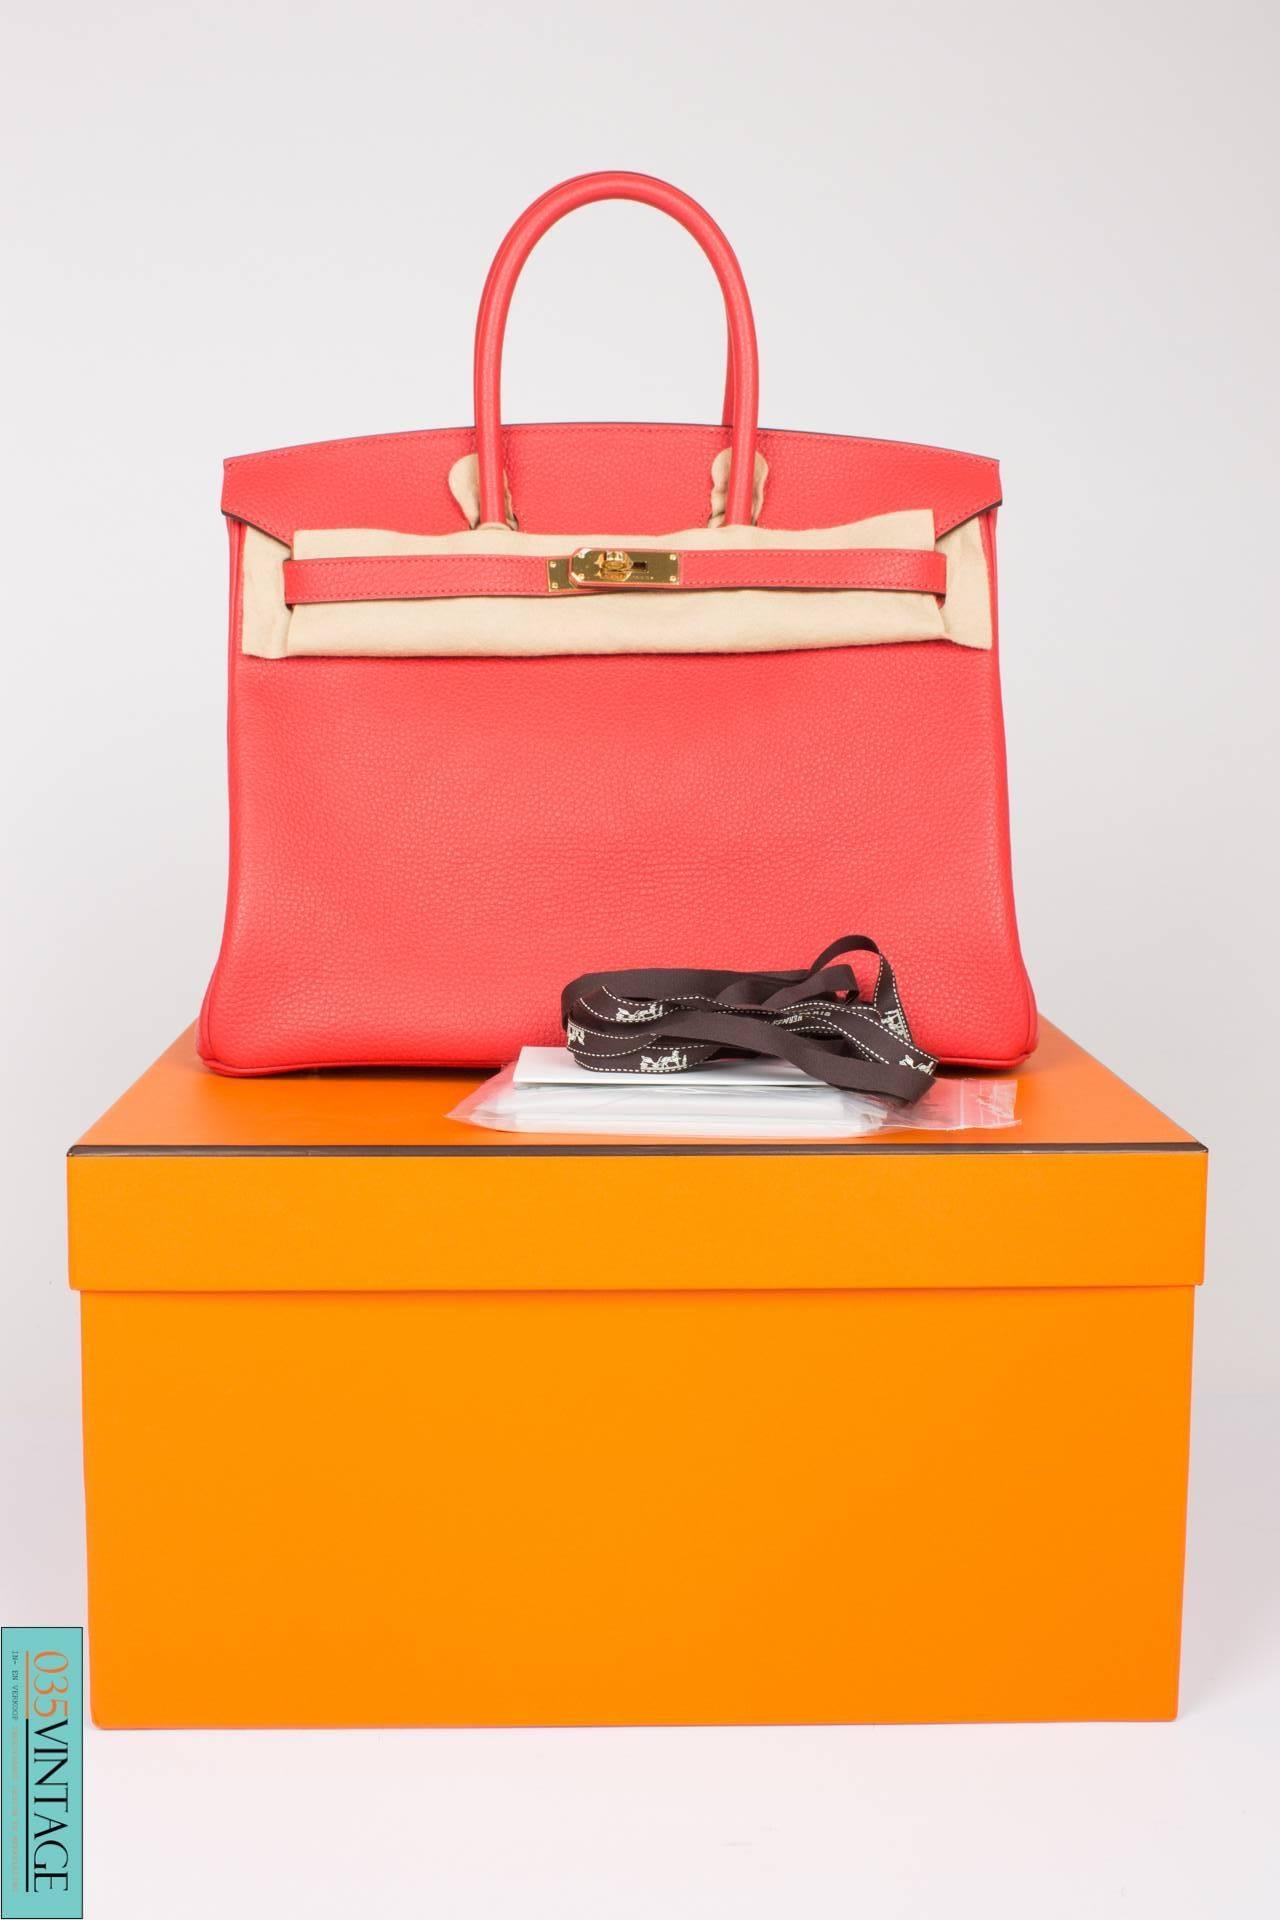 Brand new is this Hermès Birkin Bag 35 in Clemence leather with goldtone hardware, this color is named Rouge Pivoine. A kind of coral red at its very best!

Front toggle closure, clochette with lock and two keys, and double rolled handles. The